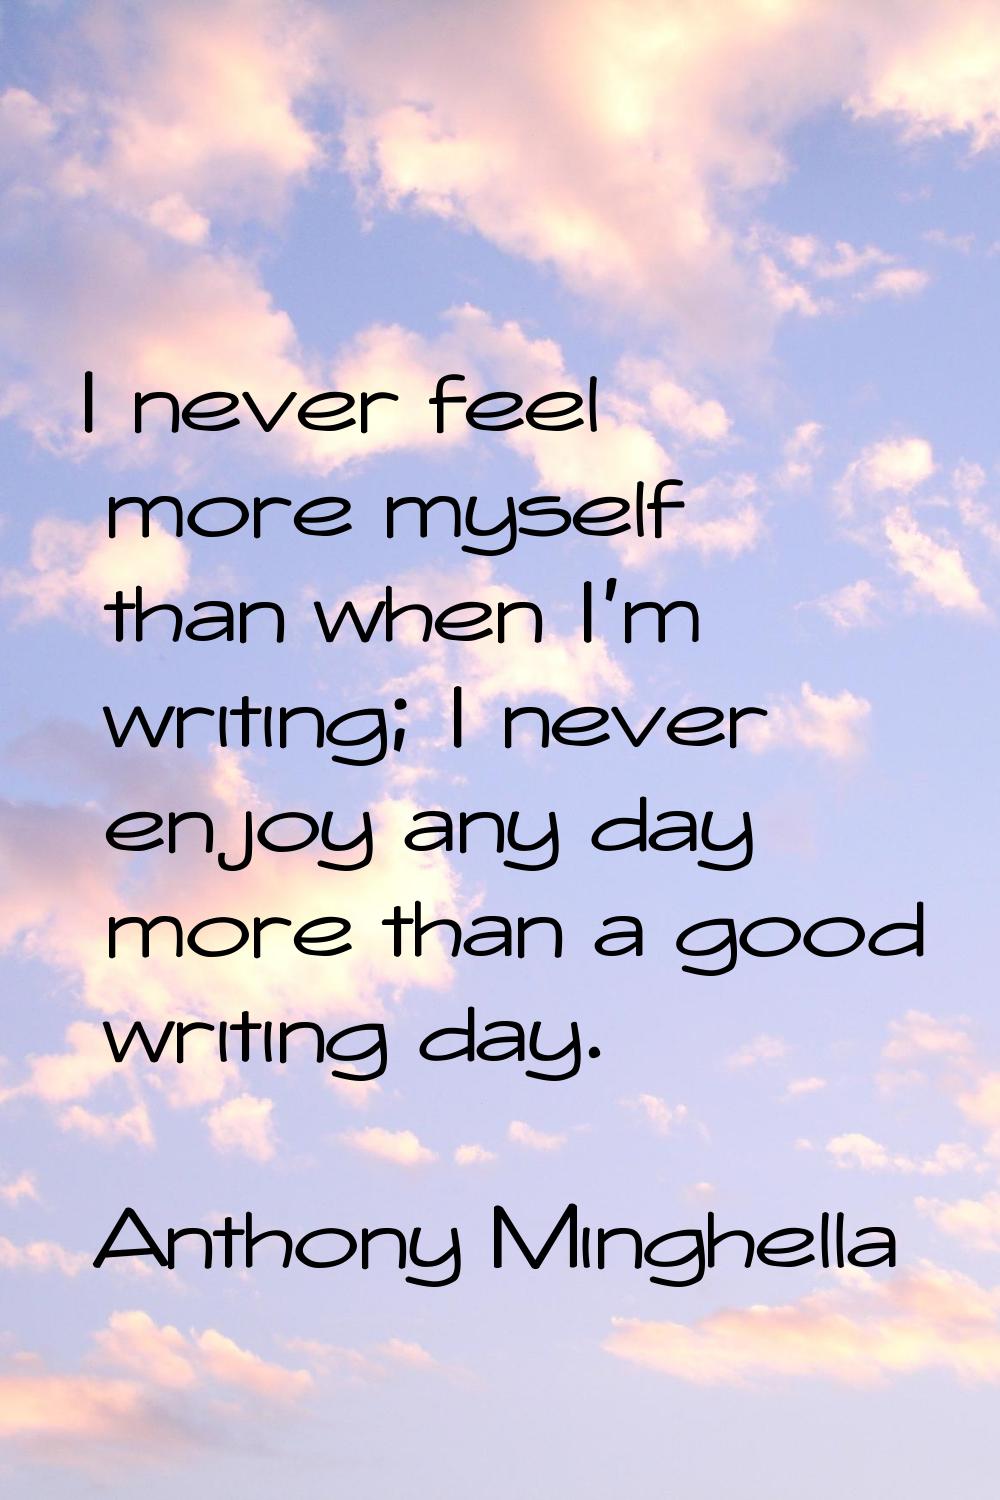 I never feel more myself than when I'm writing; I never enjoy any day more than a good writing day.